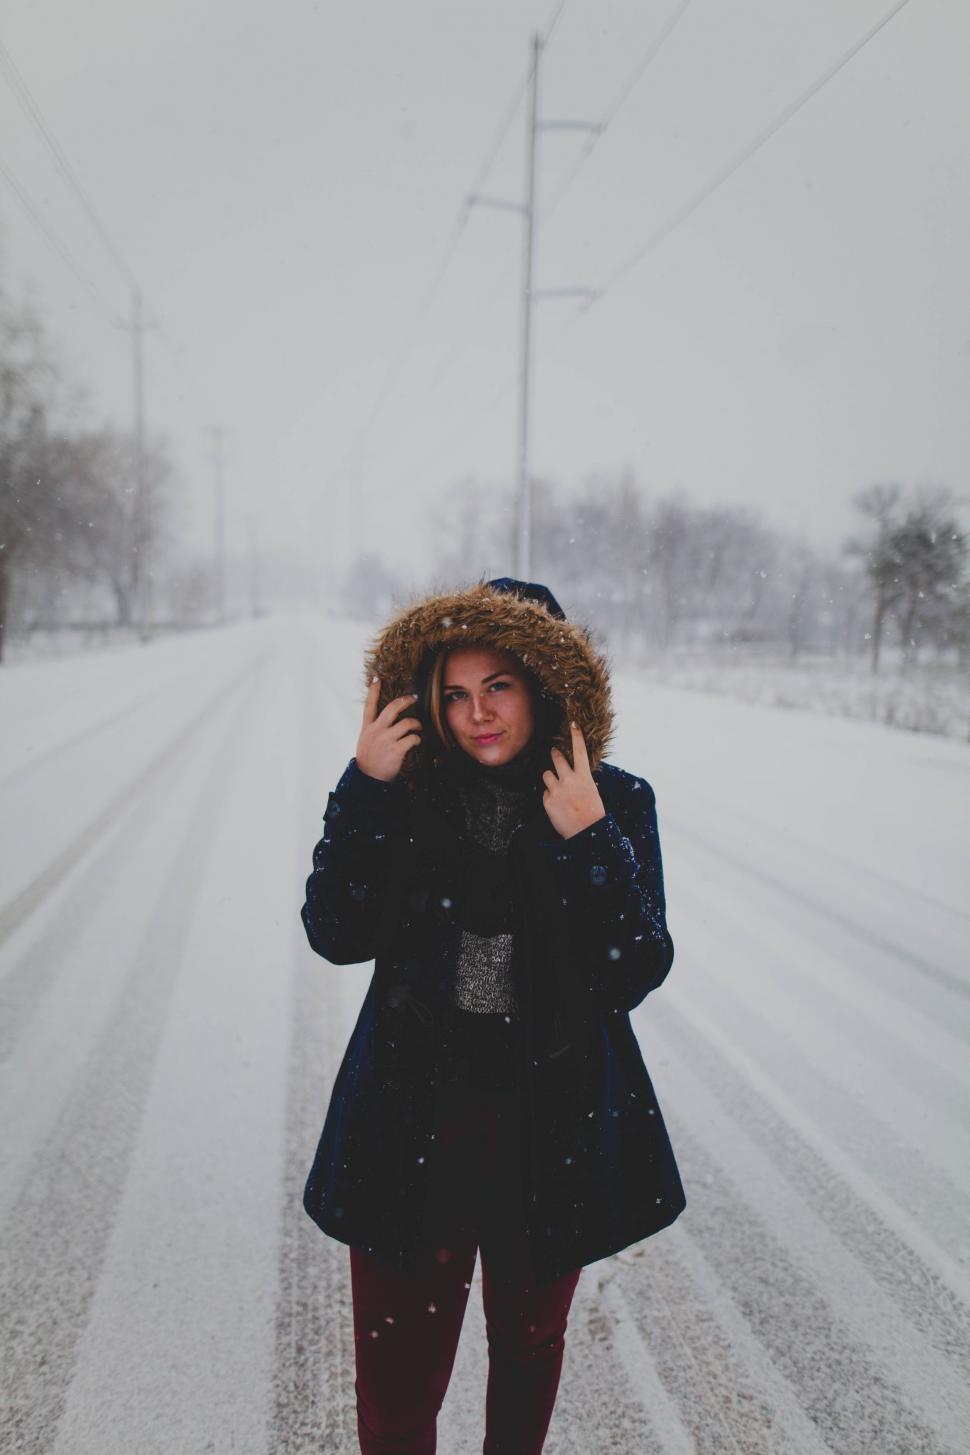 Free Image of Woman Walking Down a Snow Covered Road 